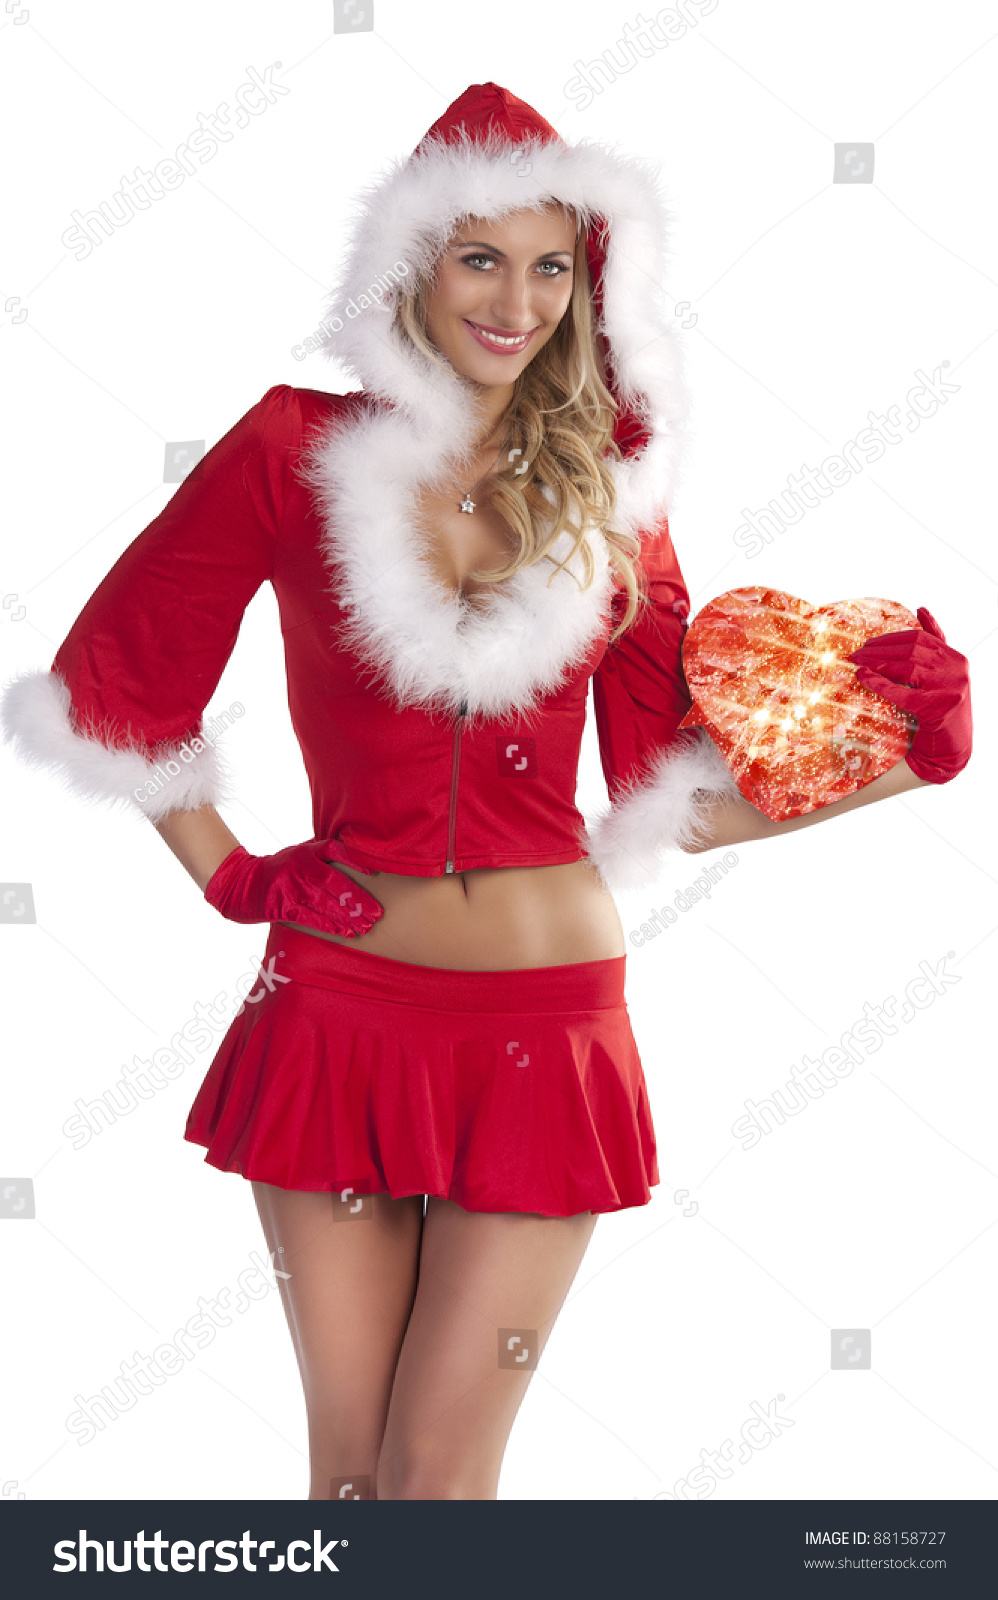 Very Sexy And Attractive Smiling Blond Girl In Red Santa Claus Costume Keeping A T Box Over